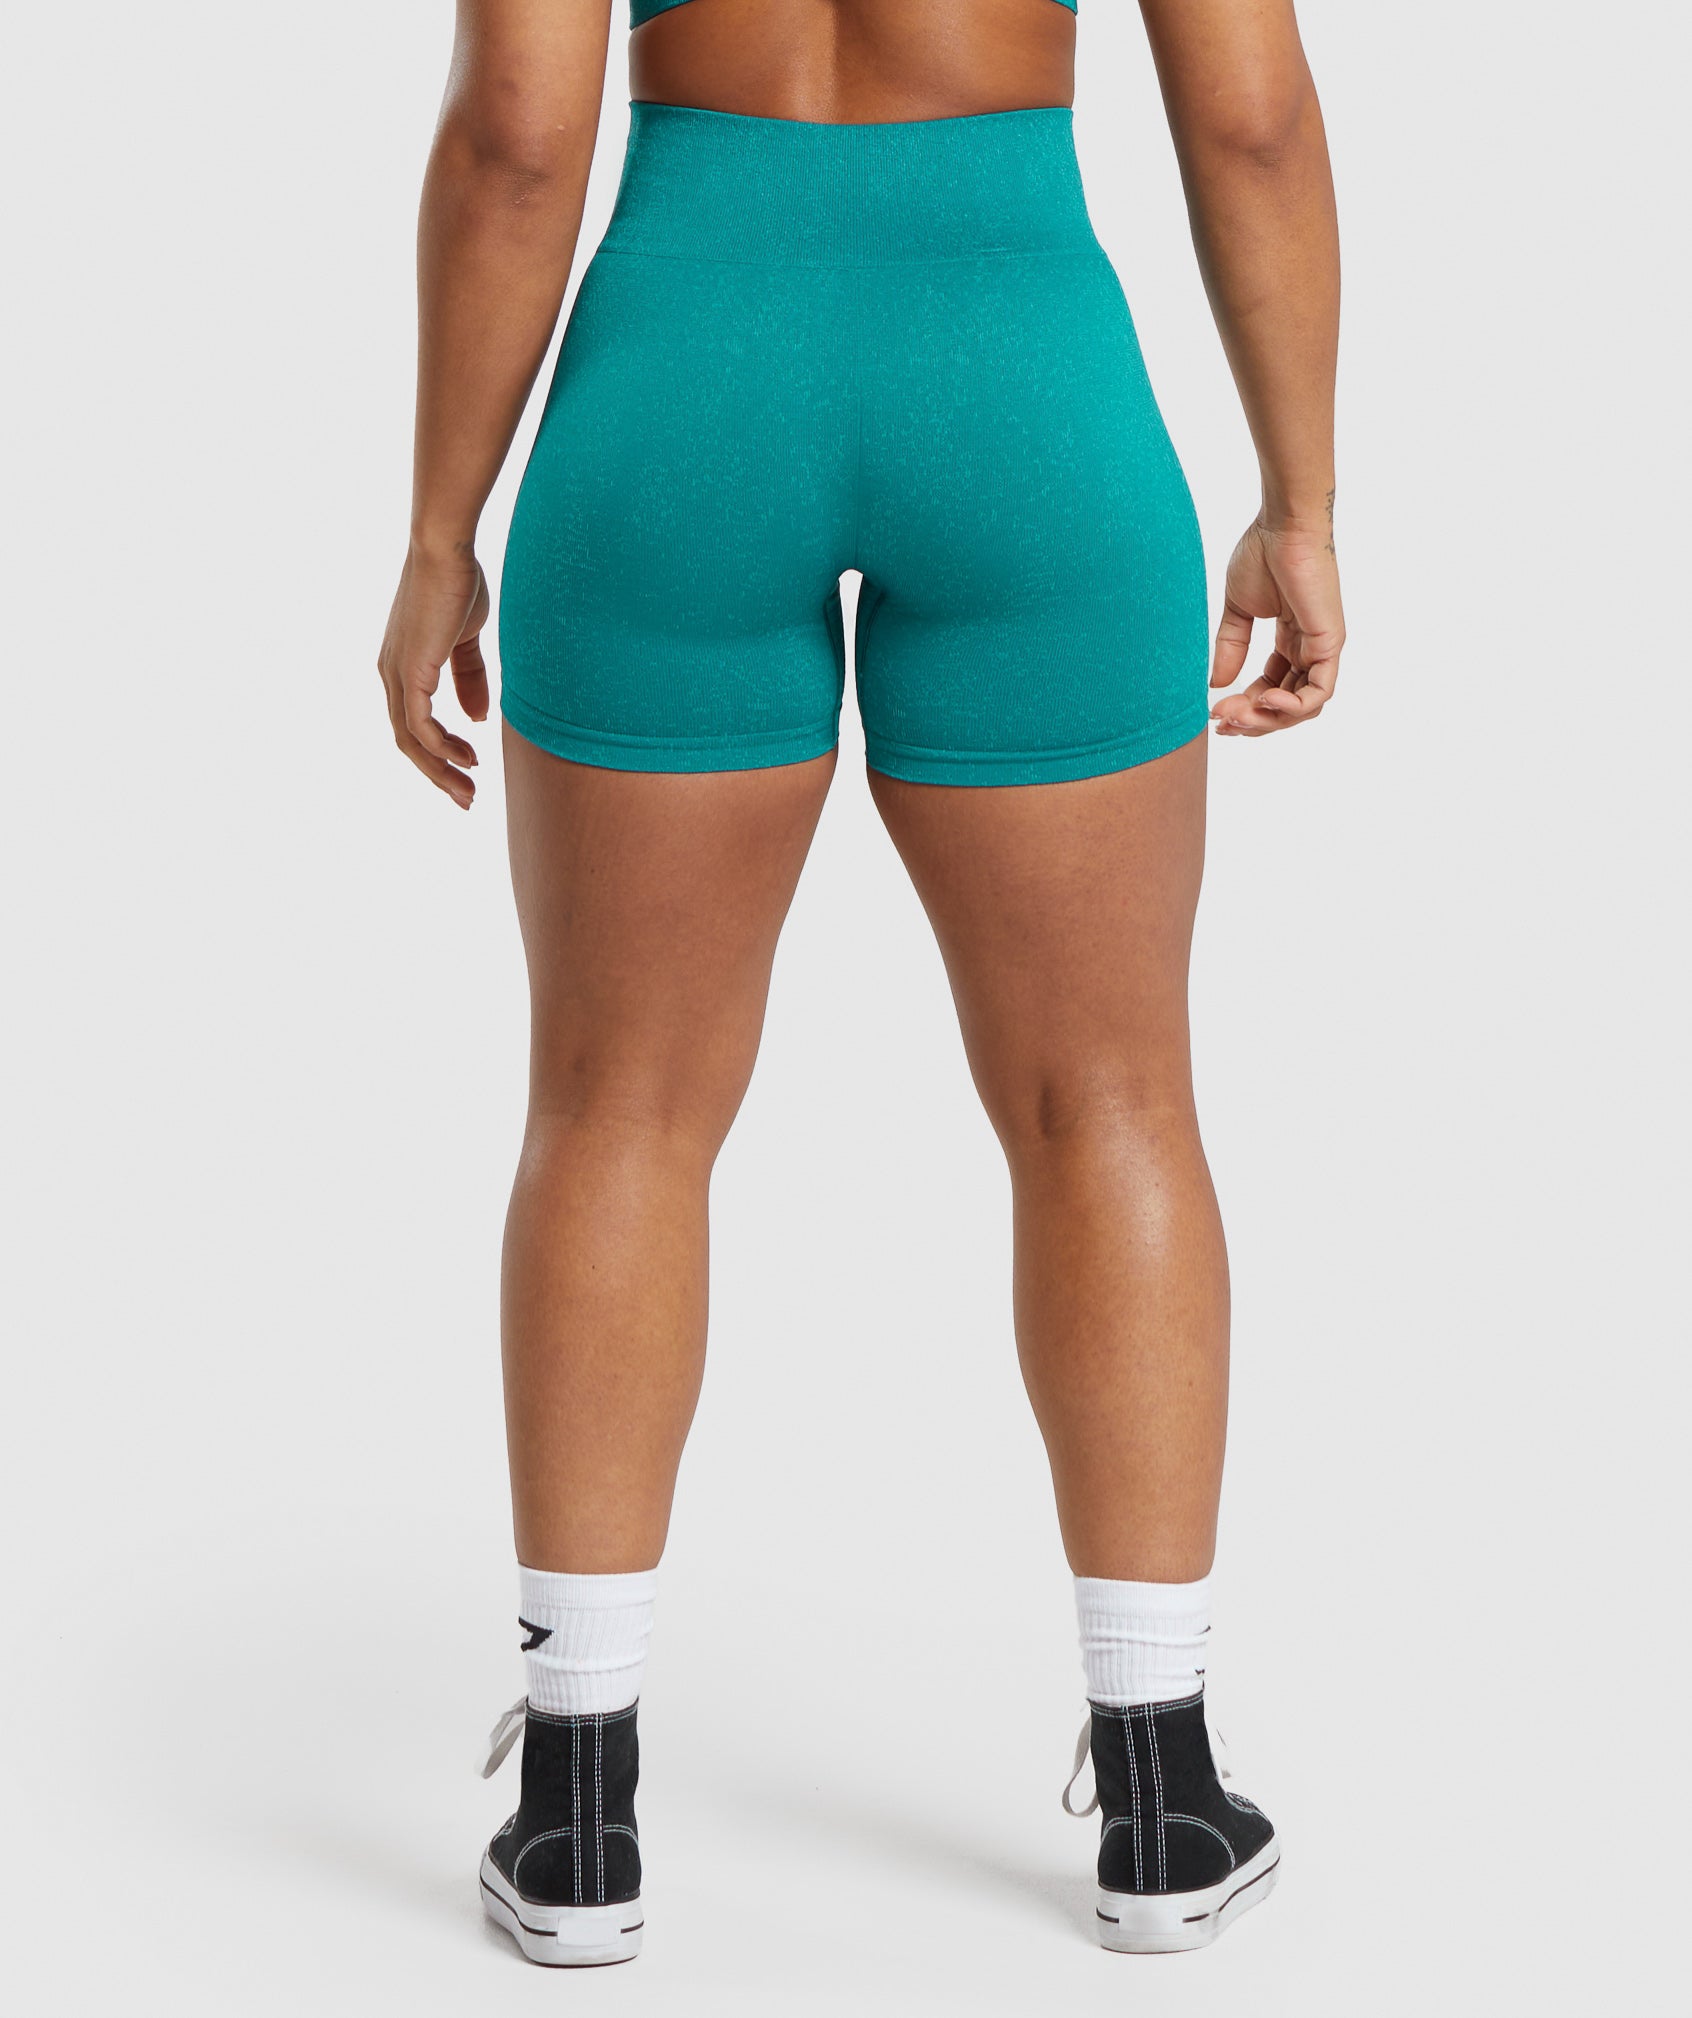 Adapt Fleck Seamless Shorts in Ocean Teal/Artificial Teal - view 2